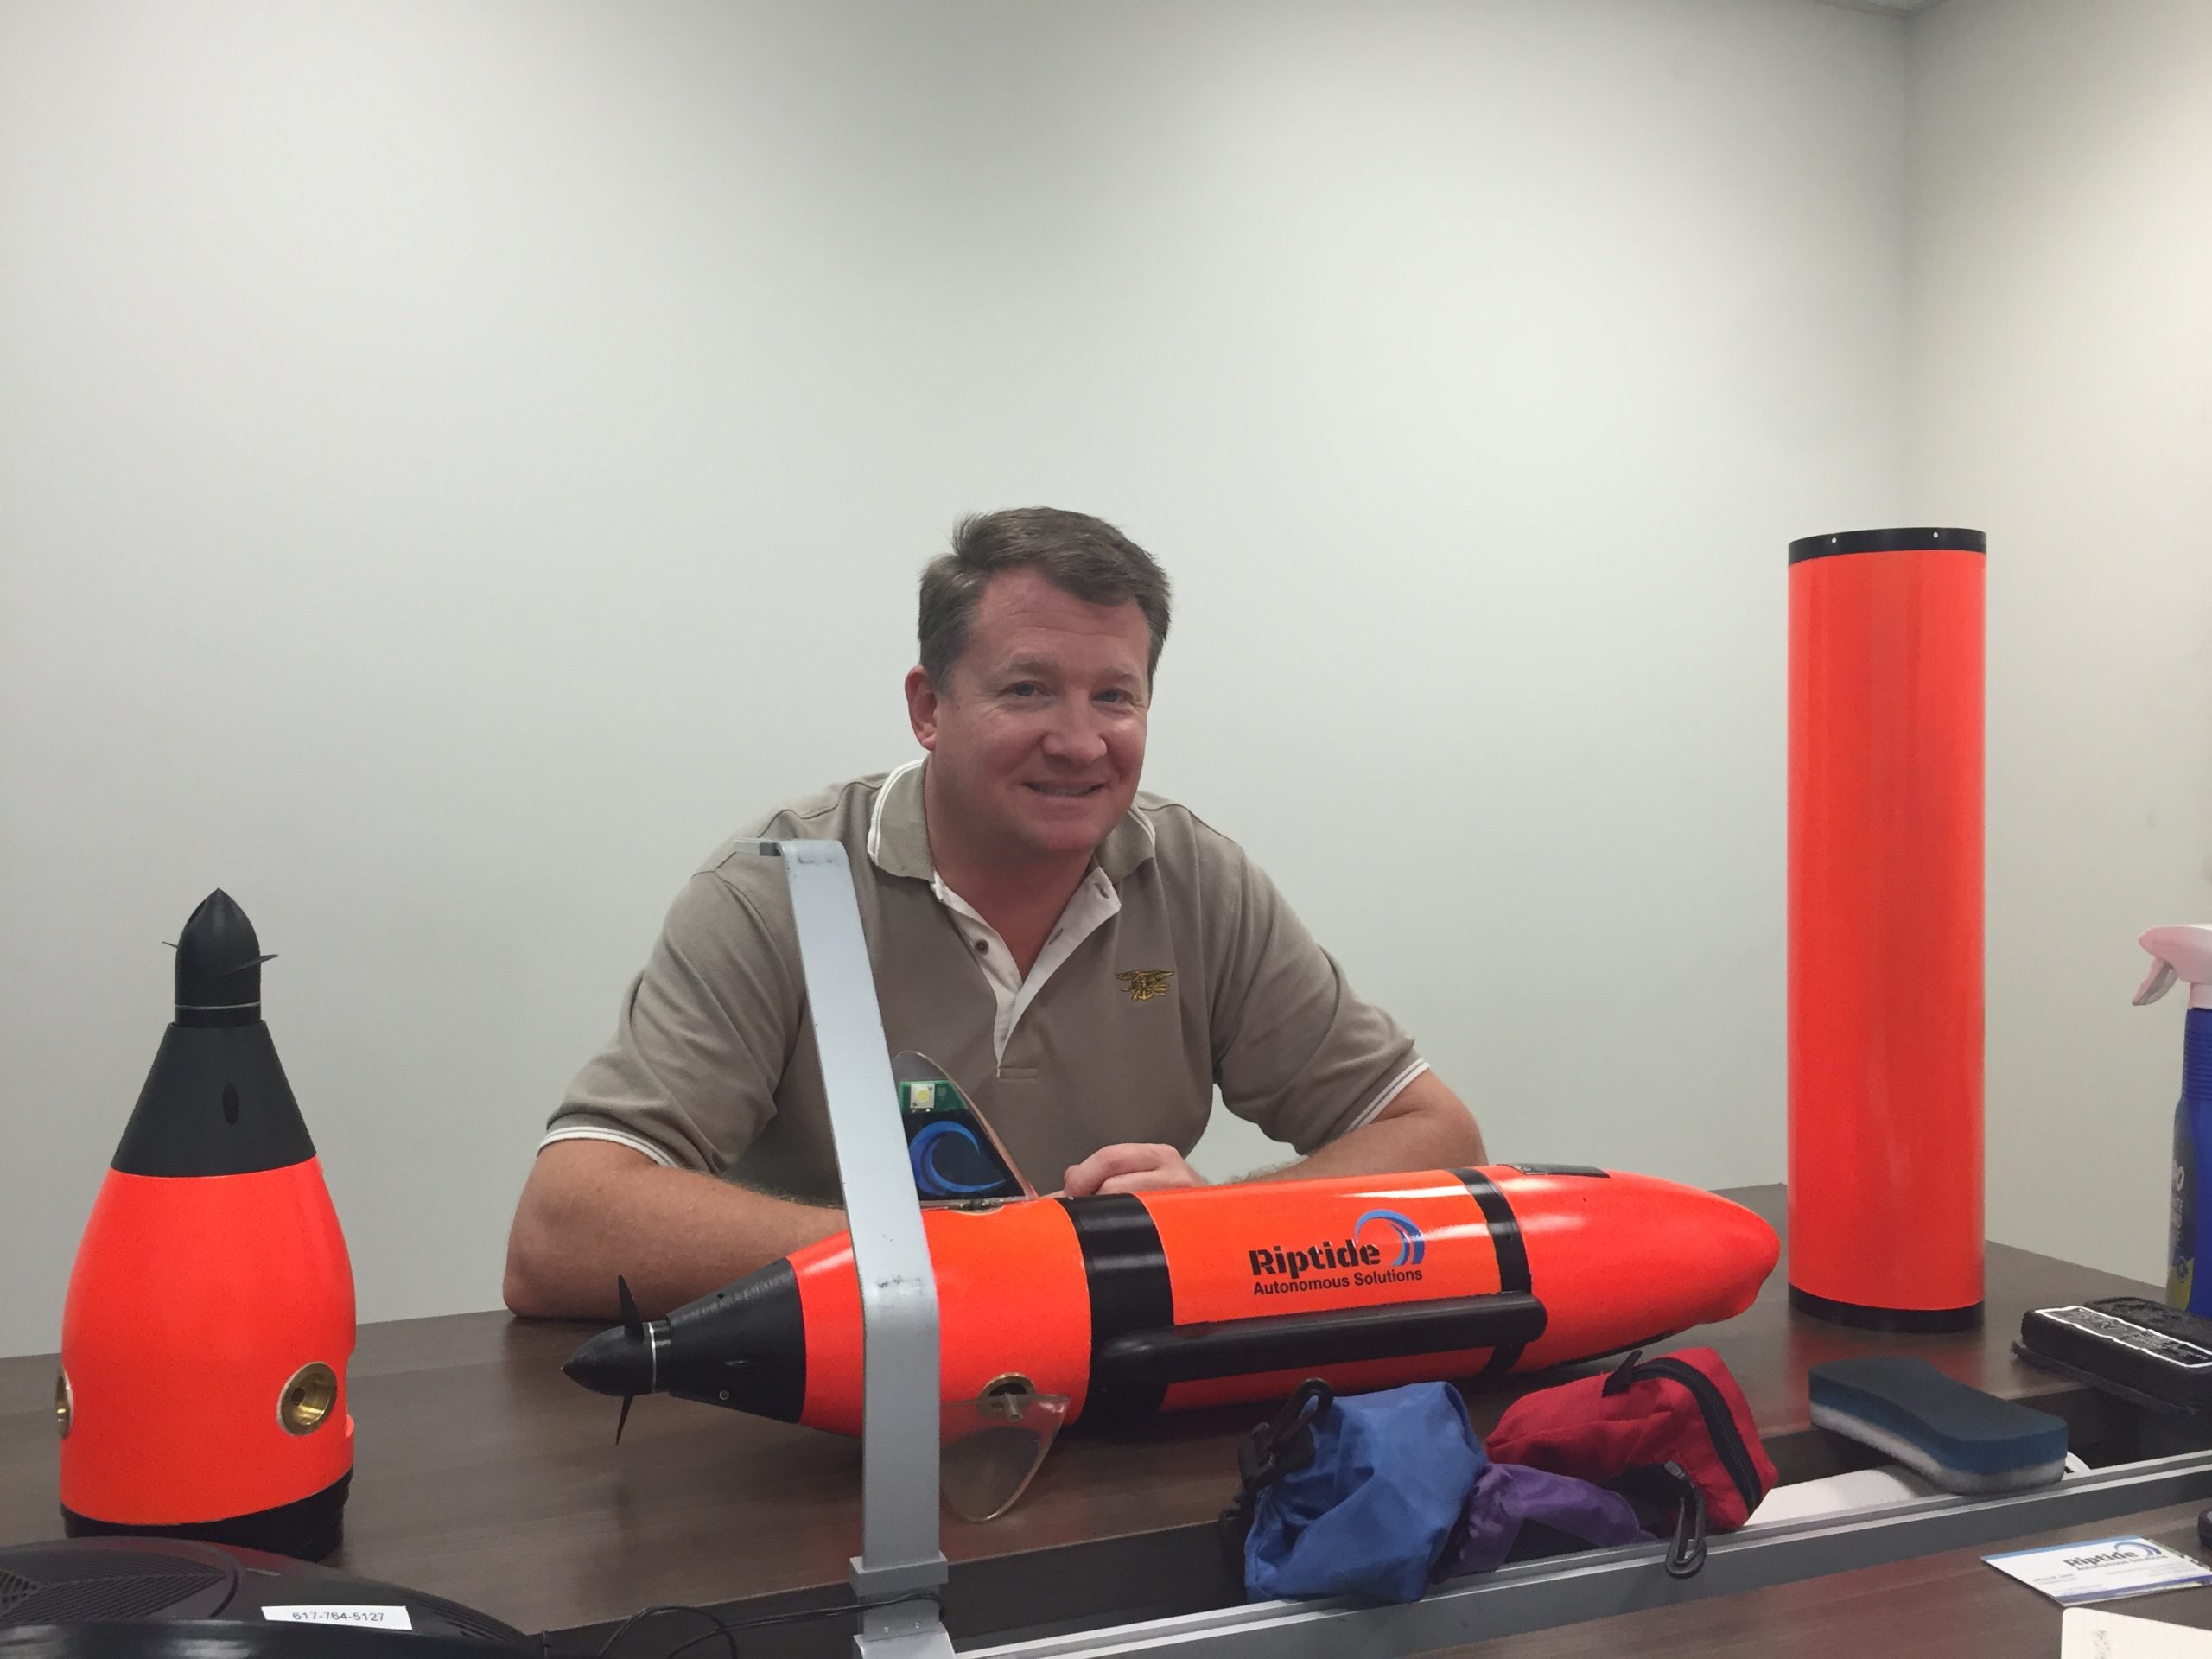 President and CEO Jeff Smith, Riptide Autonomous Solutions, displays one of their Micro-UUVs